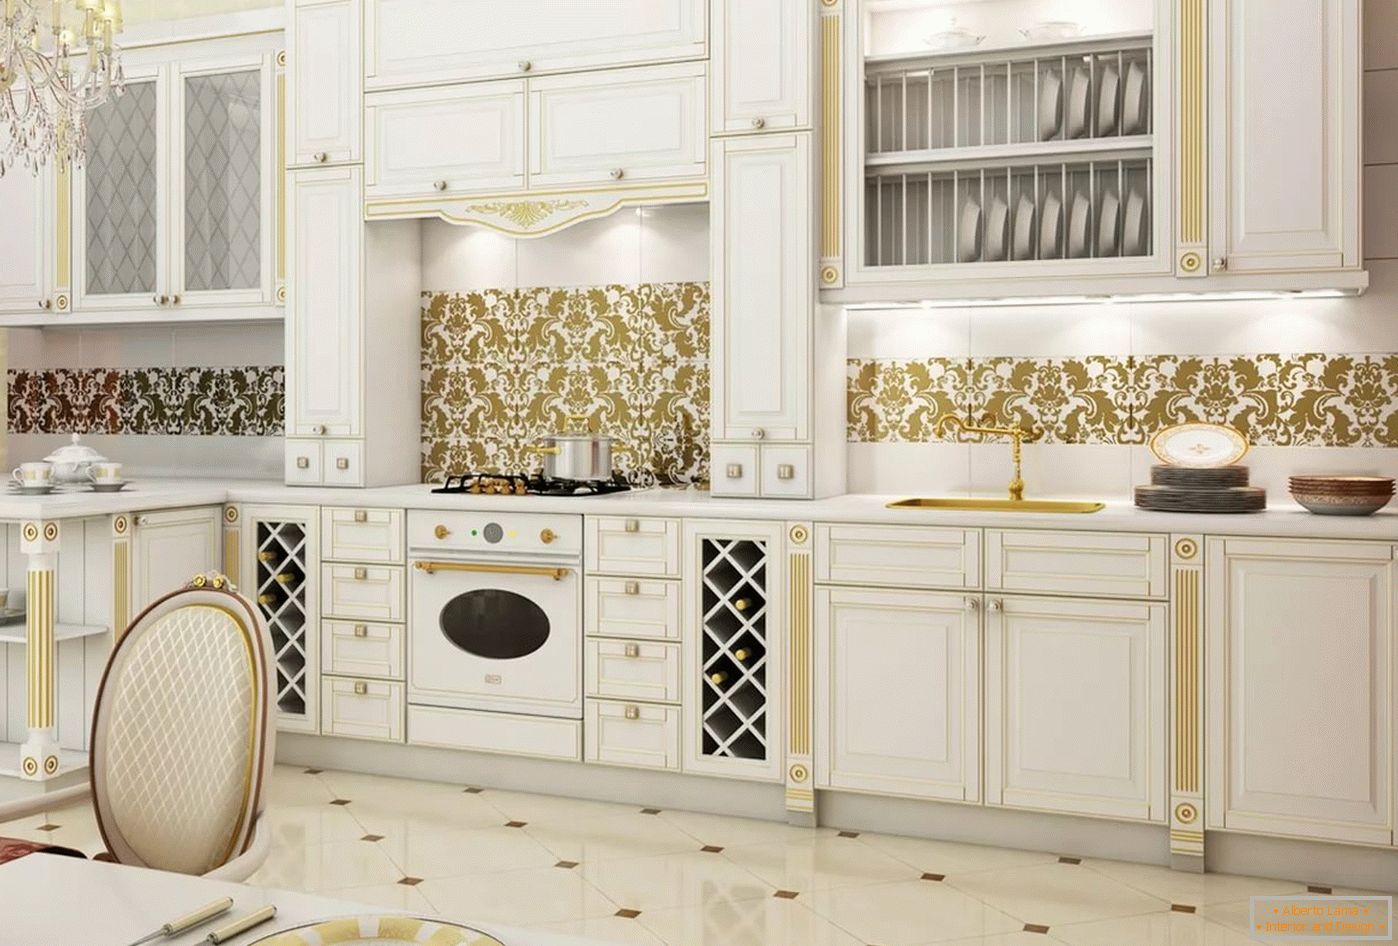 White and gold in the interior and design of the kitchen